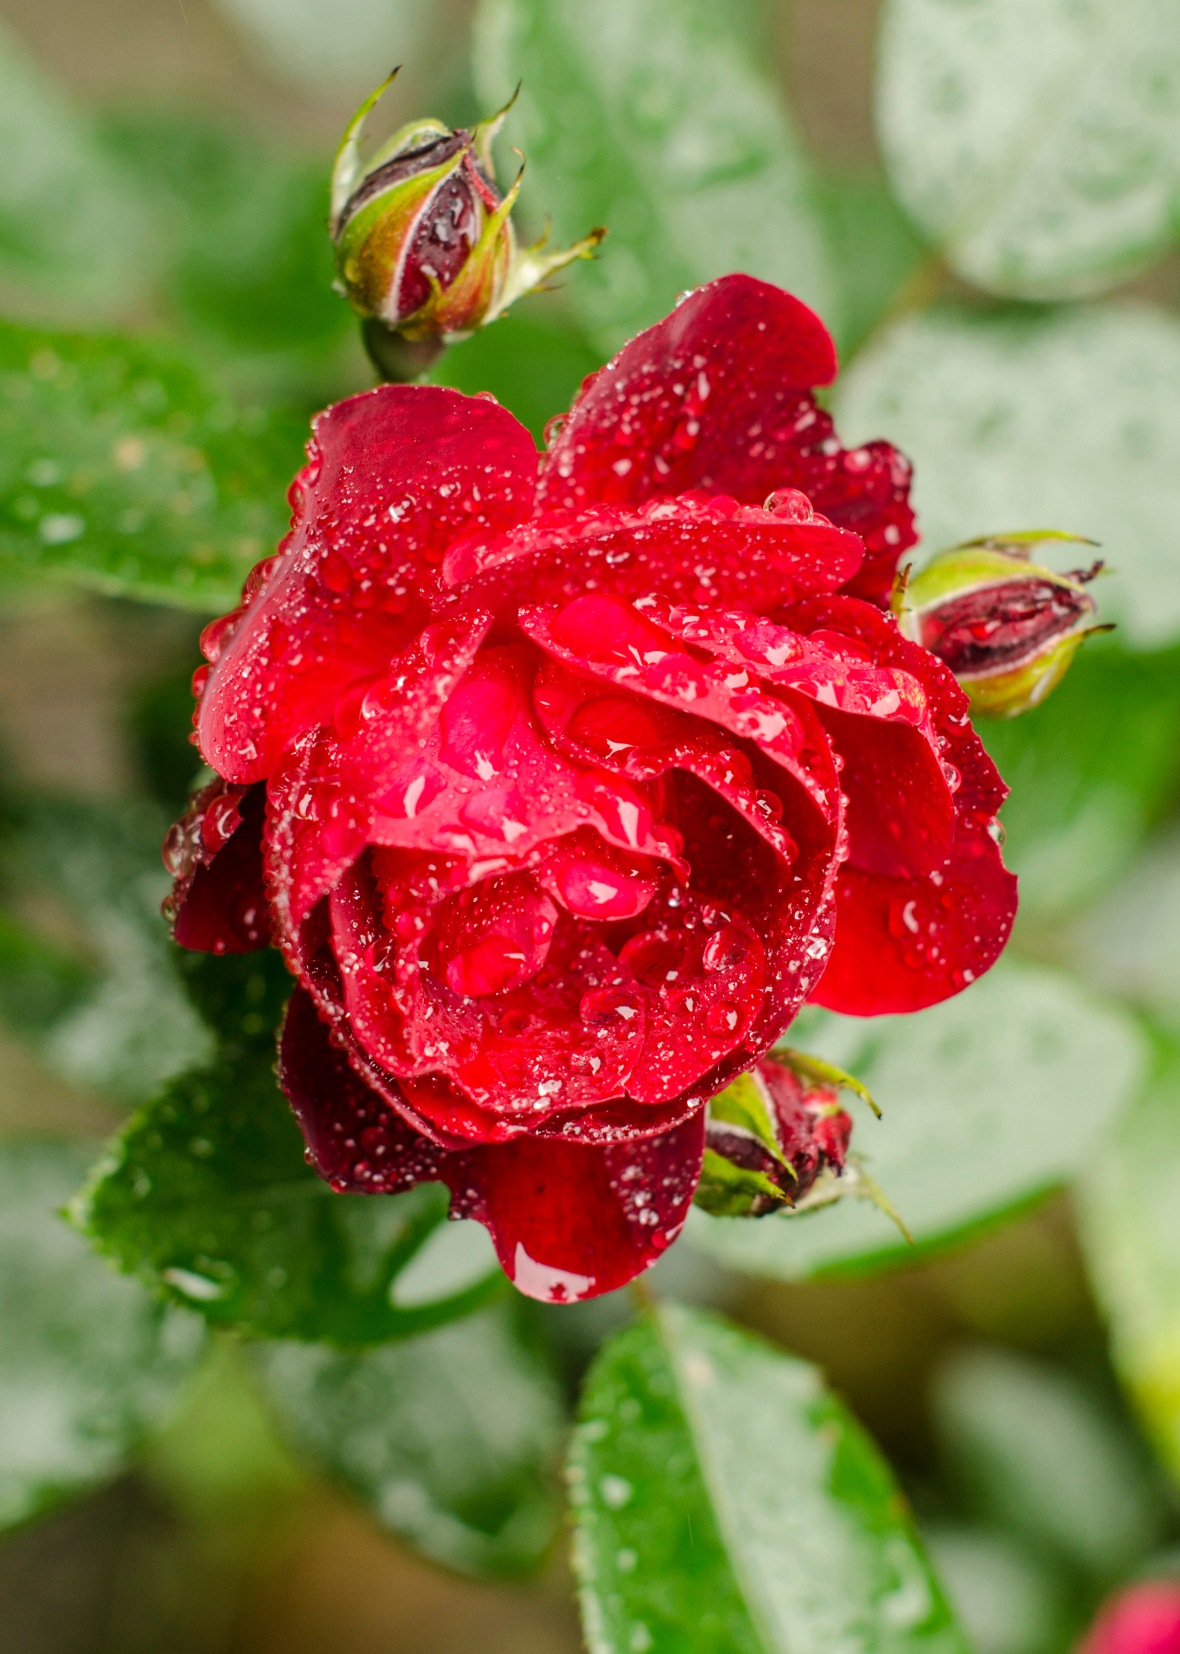 deep red garden rose sprinkled with rain